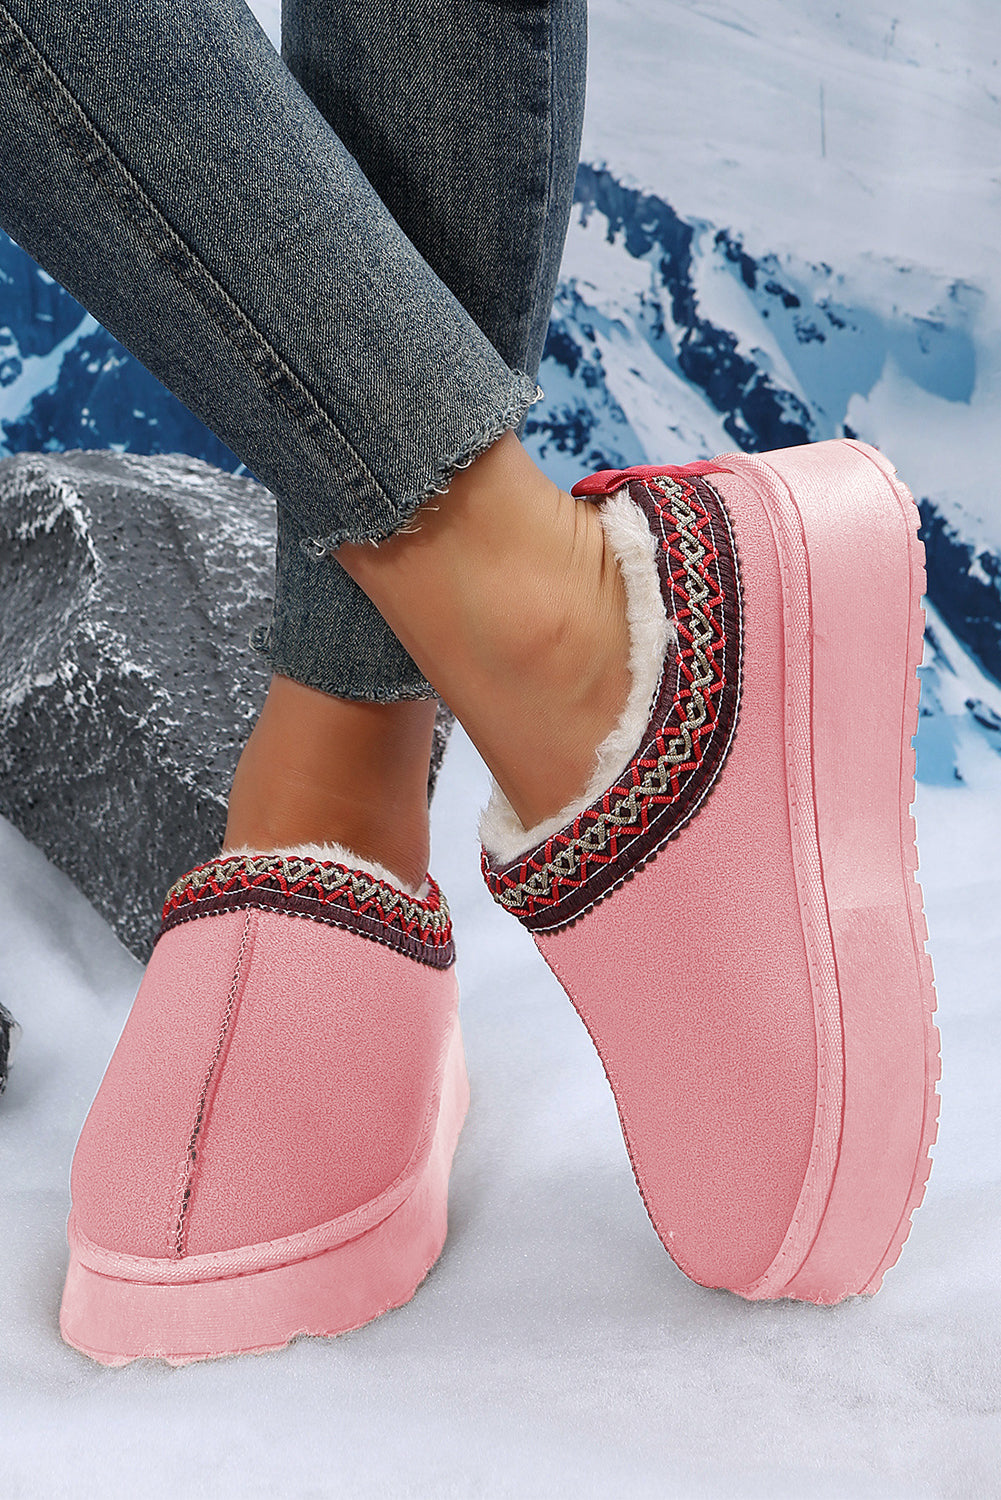 Apricot Pink Suede Contrast Print Plush Lined Snow Boots